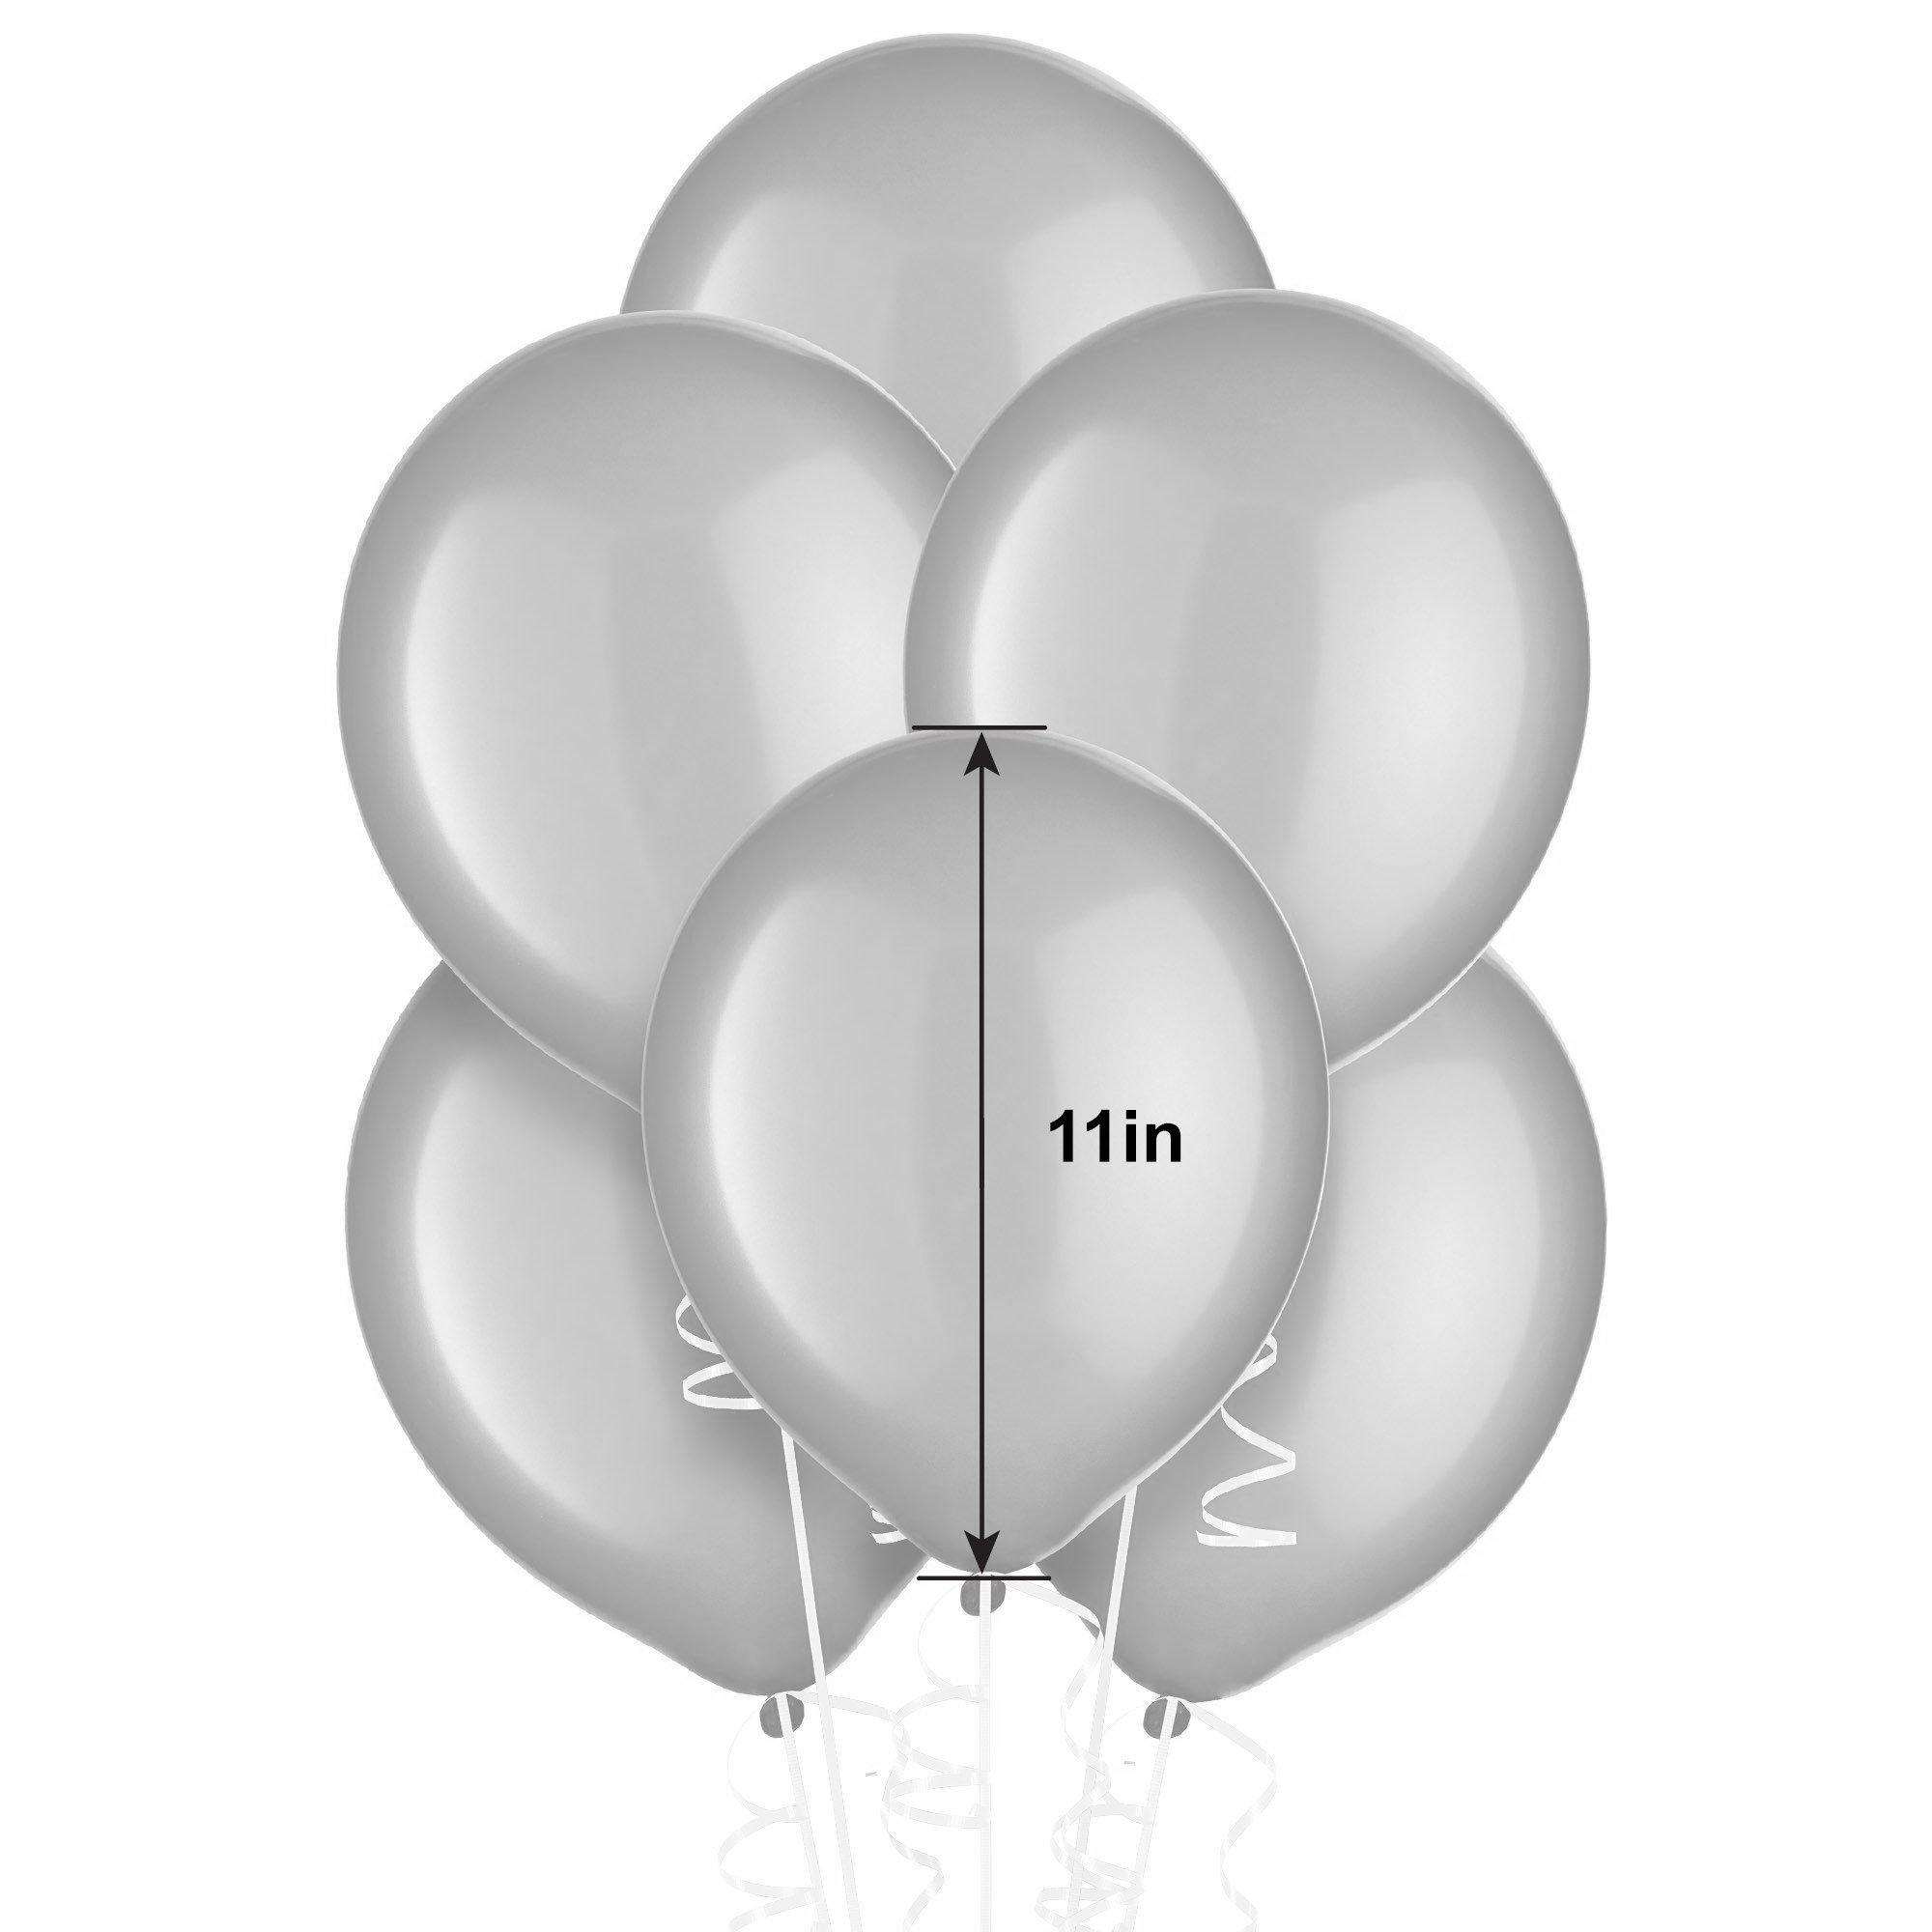 15ct, 11in, Gold 3-Color Mix Latex Balloons - Clear, Gold & White